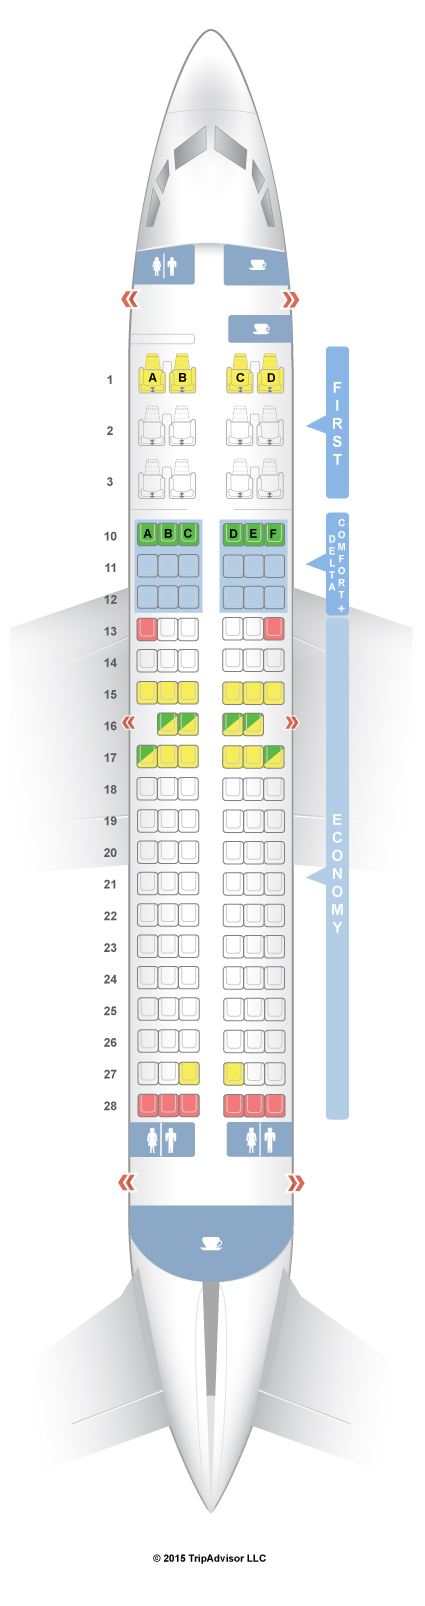 Southwest Boeing 737 300 Seating Chart